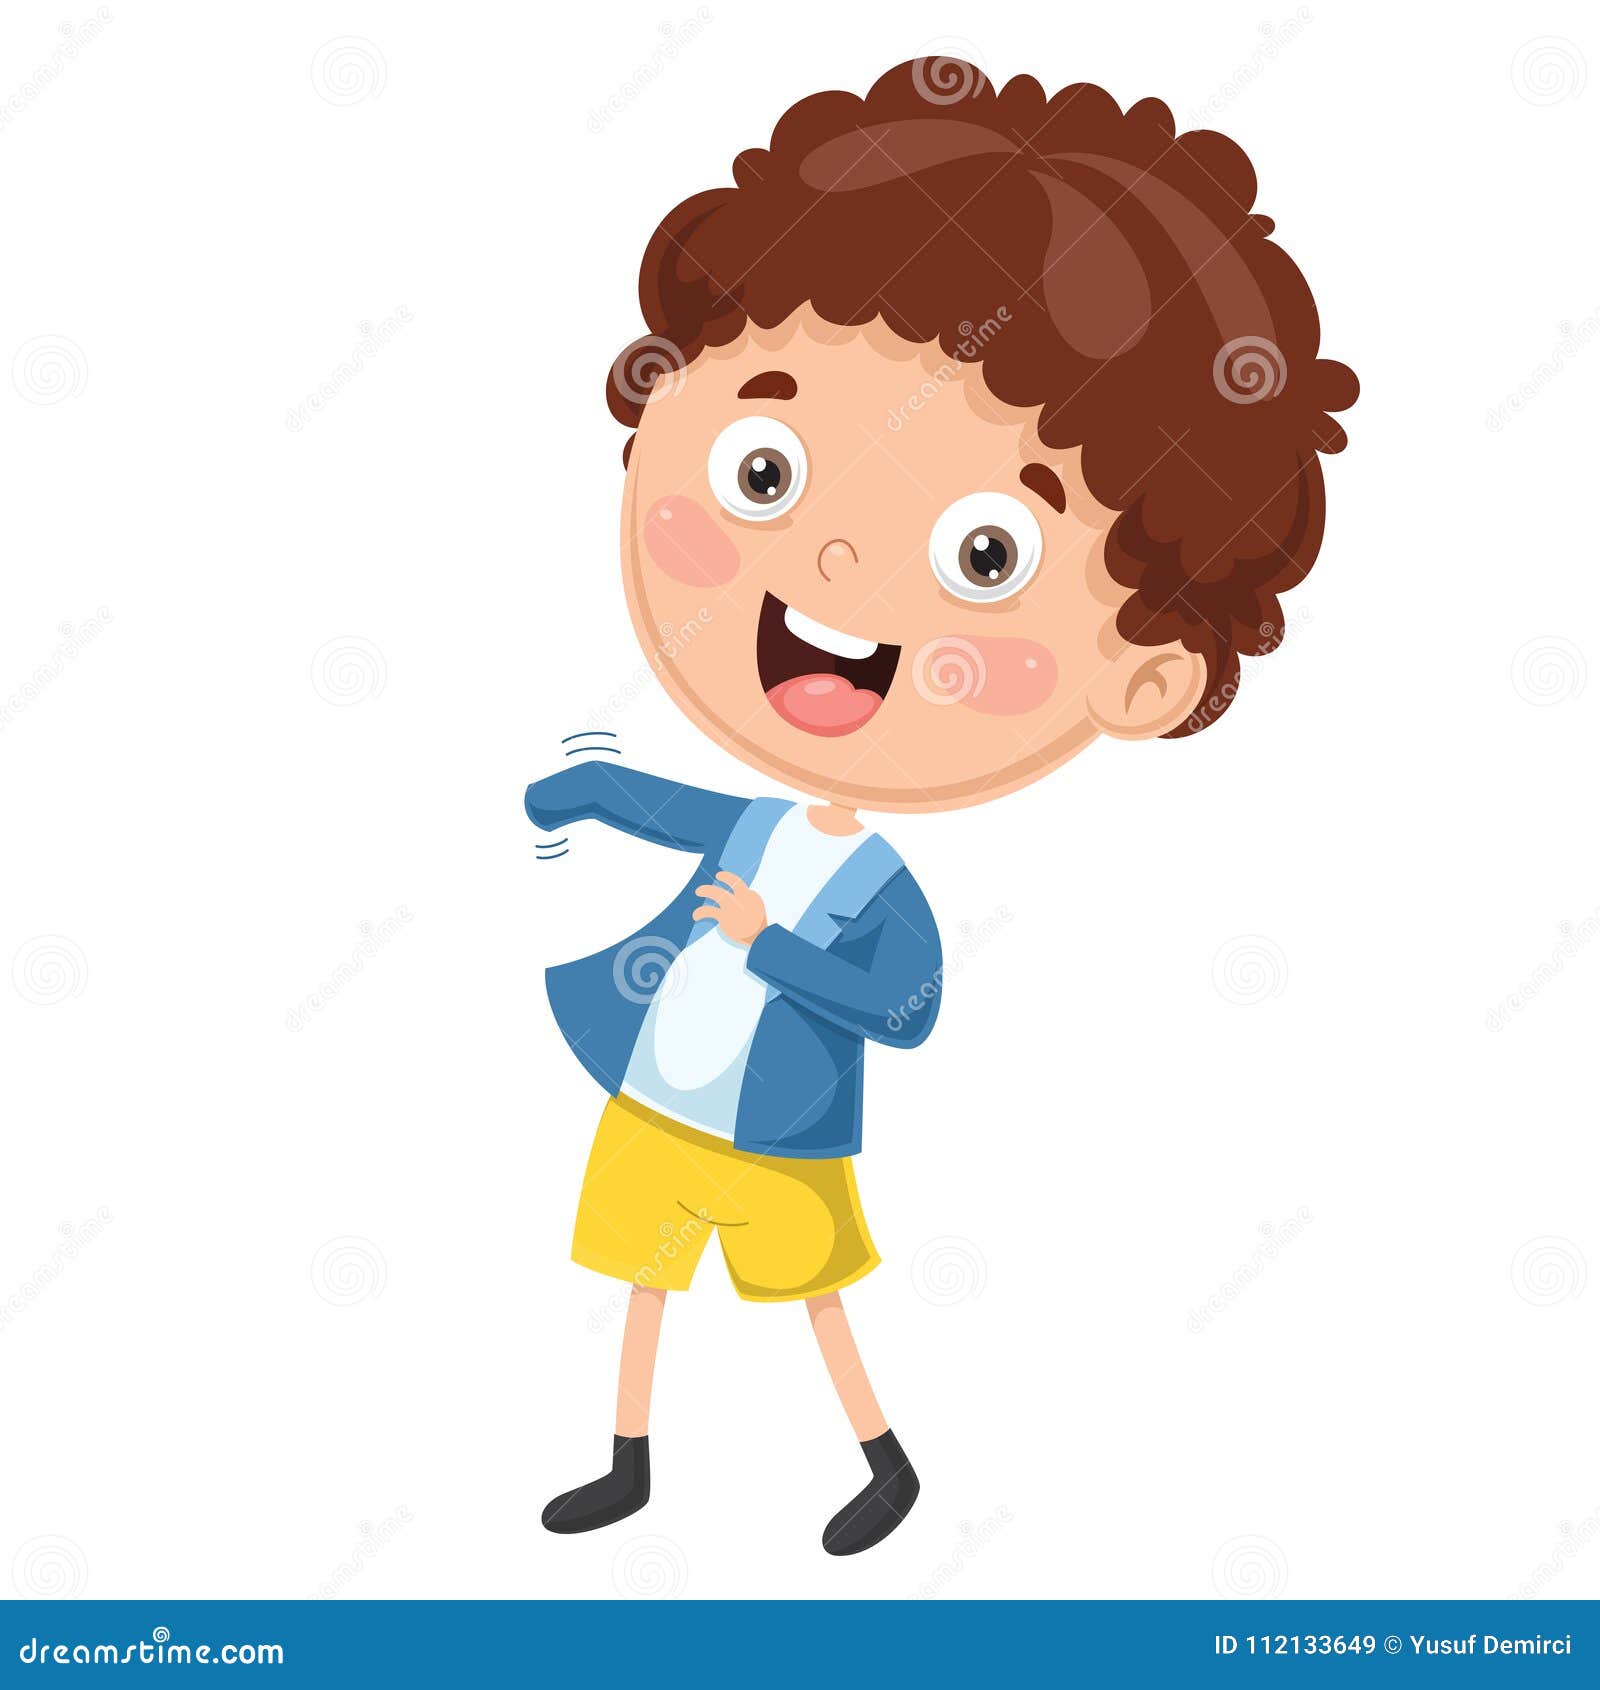 Vector Illustration of Kid Wearing Clothes Stock Vector - Illustration of  doodle, people: 112133649